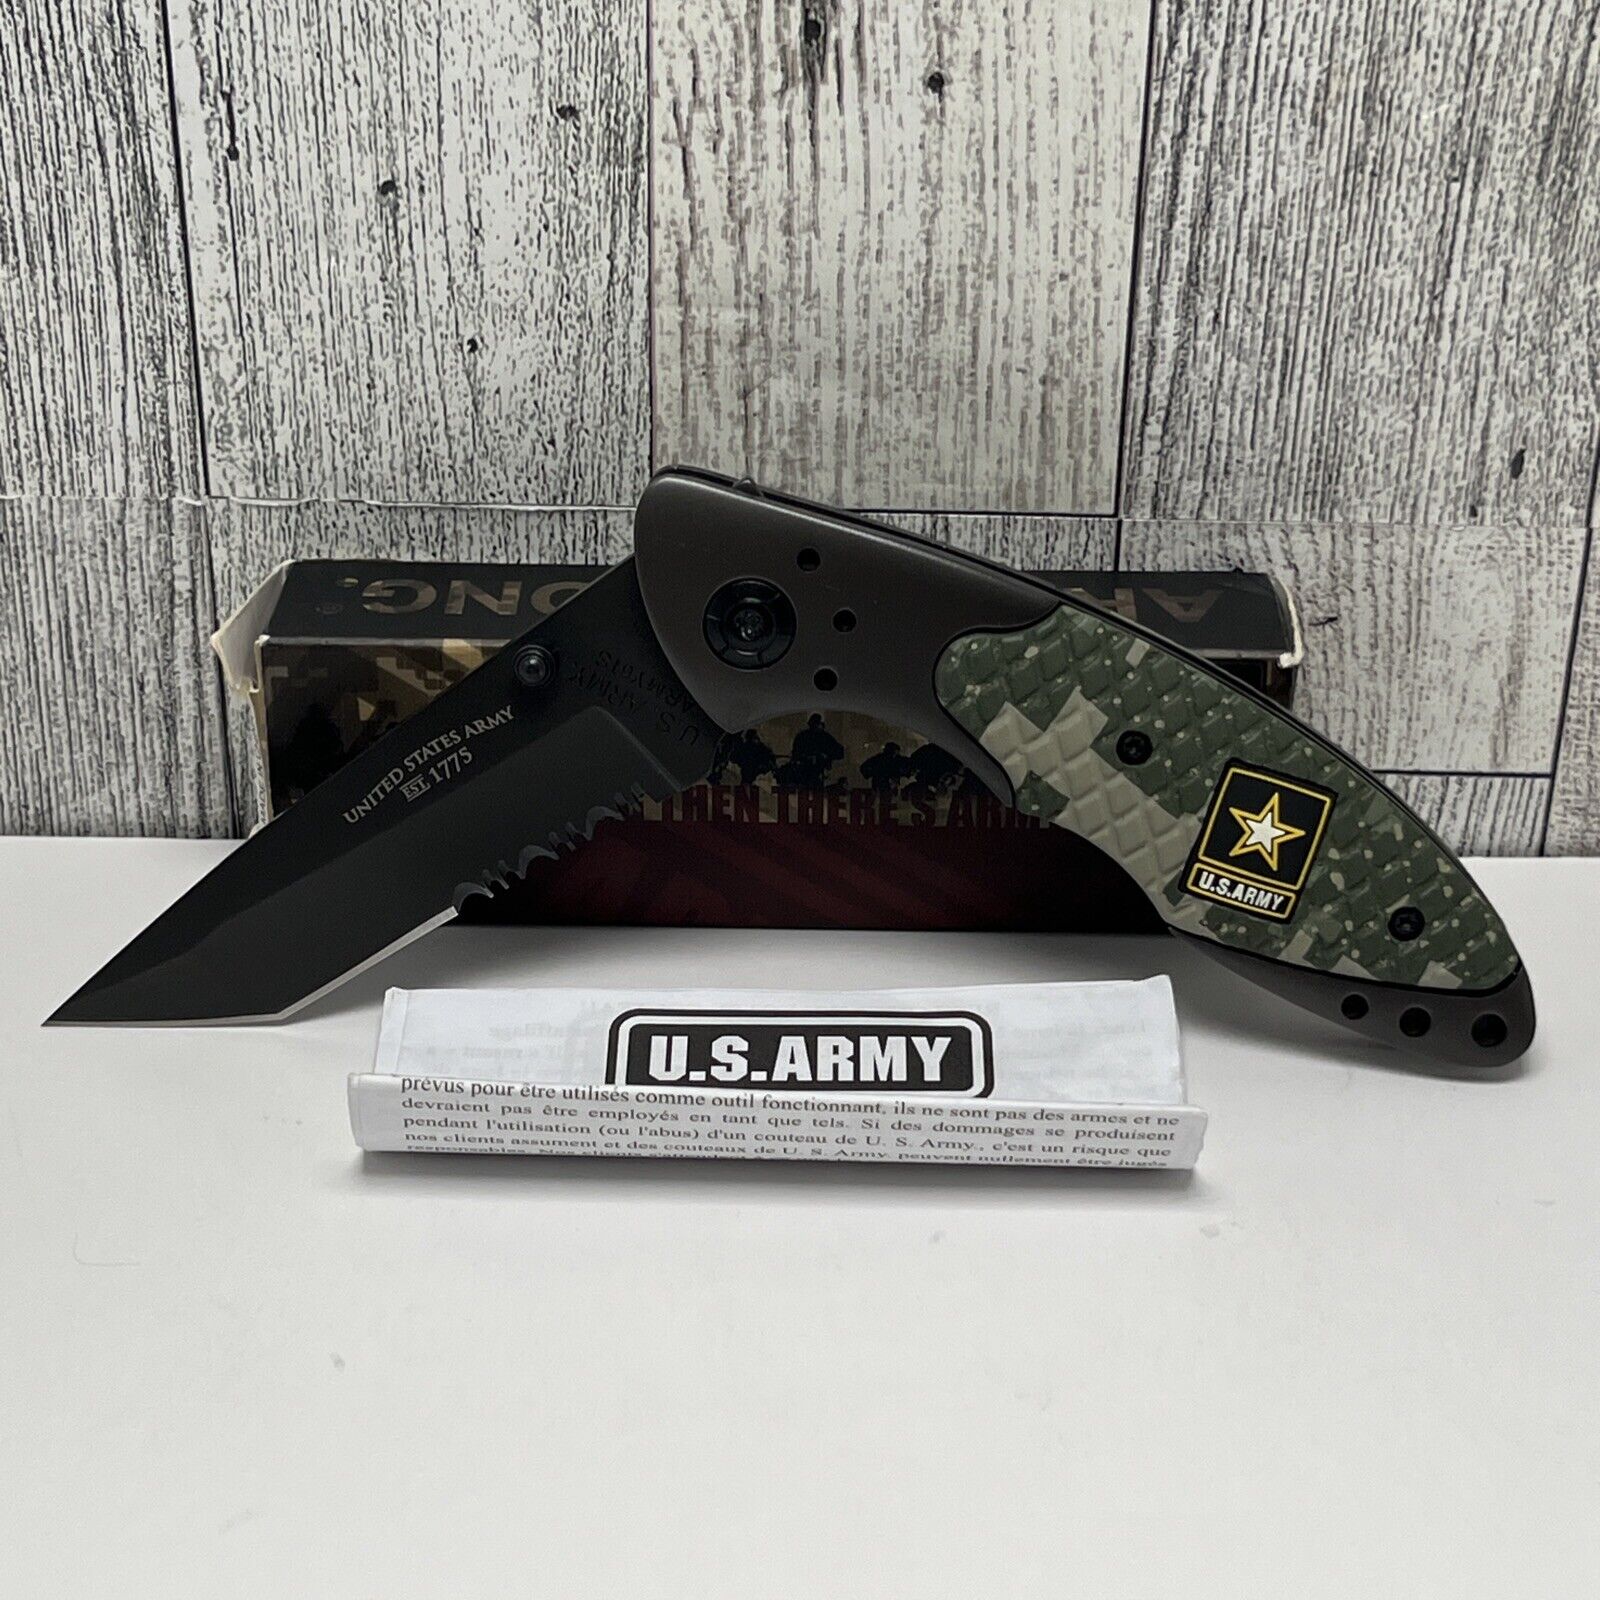 Offical Licensed U.S. Army Knife Schrade  Tanto Serrated Knife ARMY6TS